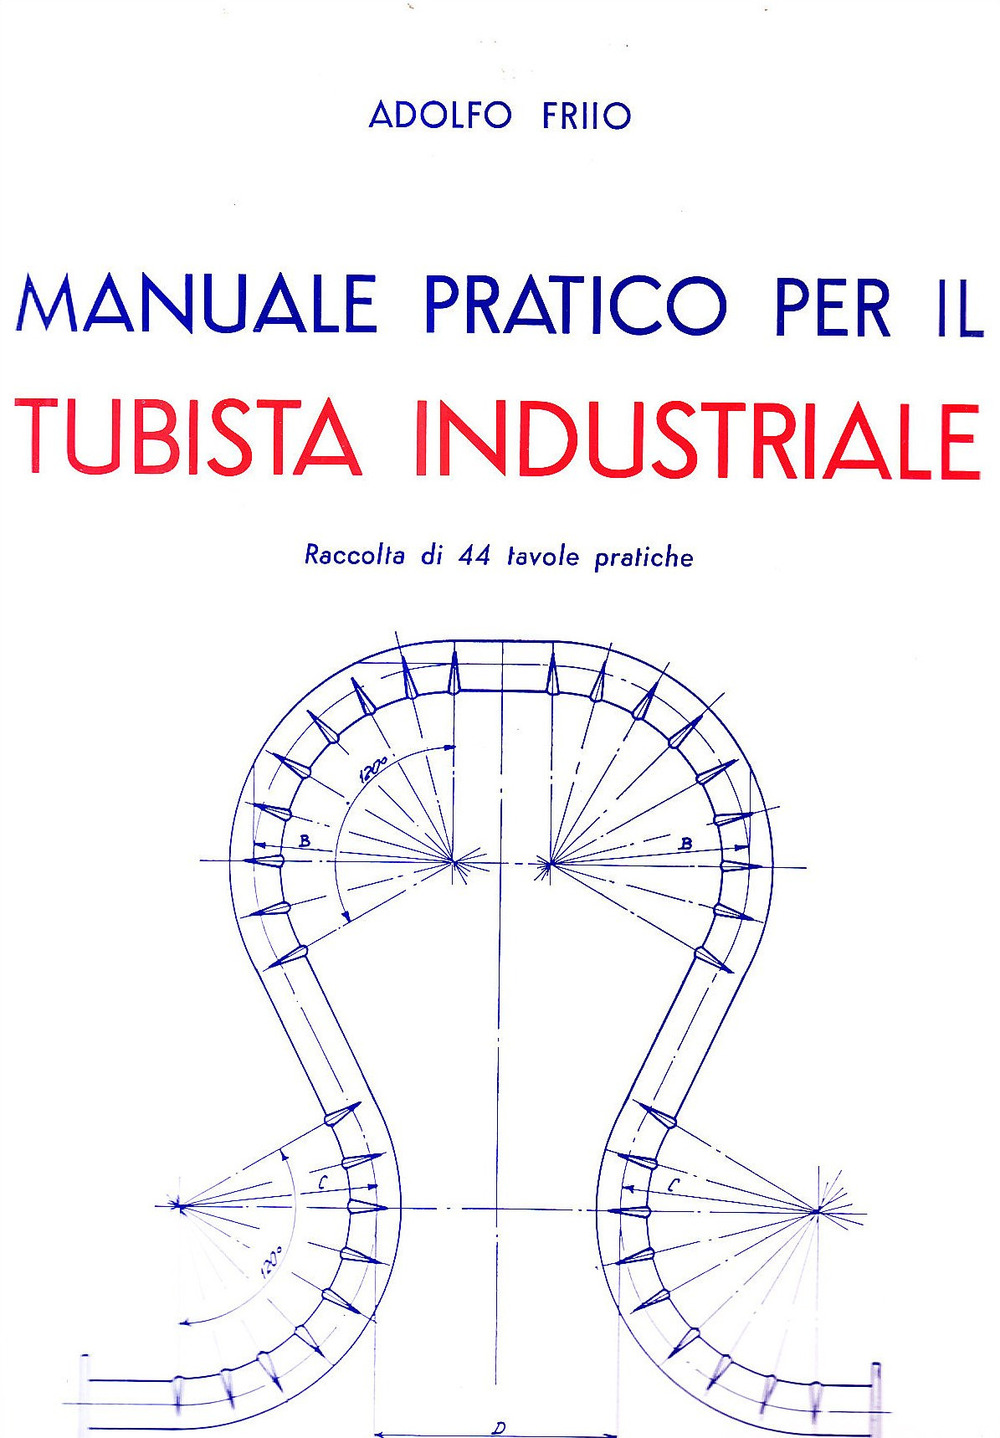 Practical Manual for the Industrial Tubist - Friio A. - Picture 1 of 1